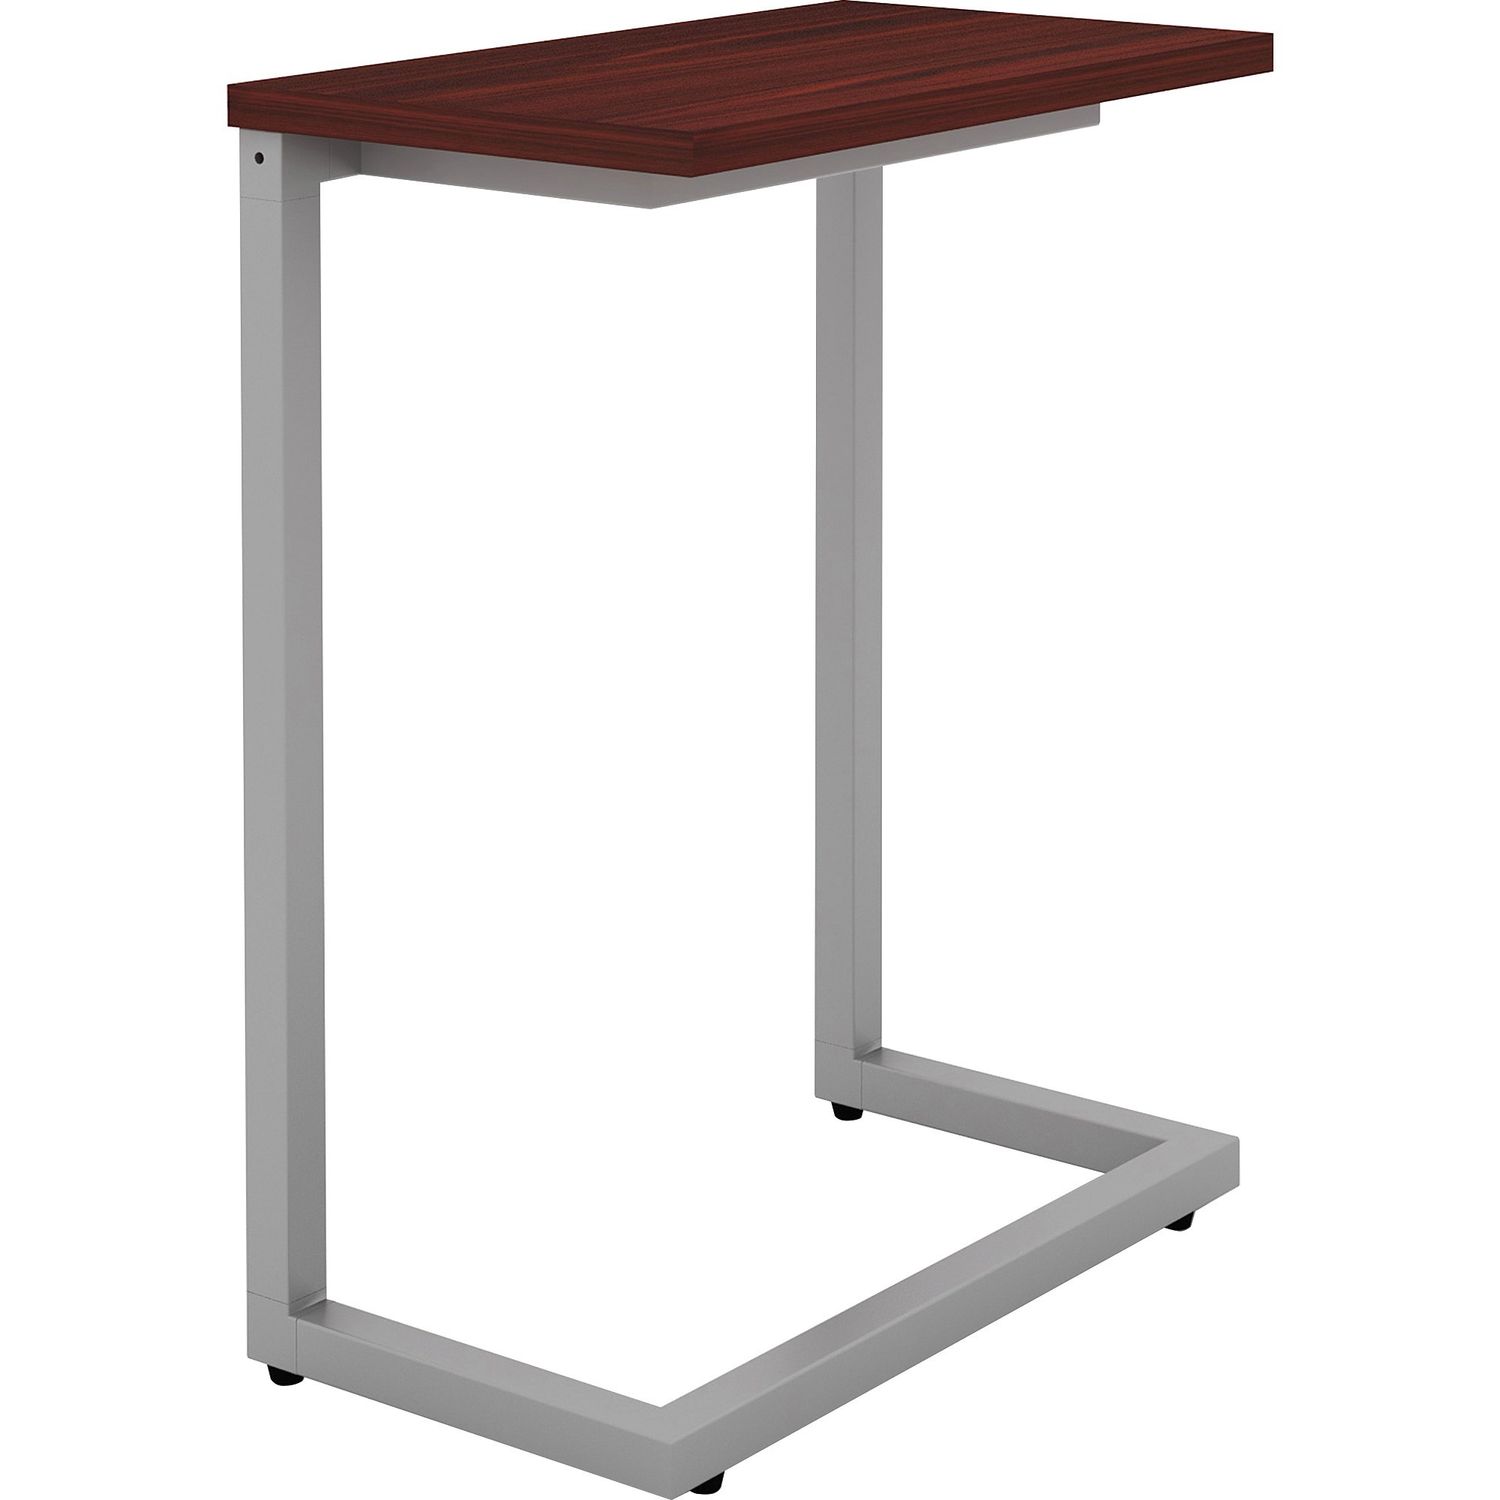 Guest Area Cantilever Table Mahogany Rectangle Top, Cantilever Base, 9.90" Table Top Length x 17.40" Table Top Width, 26.50" Height